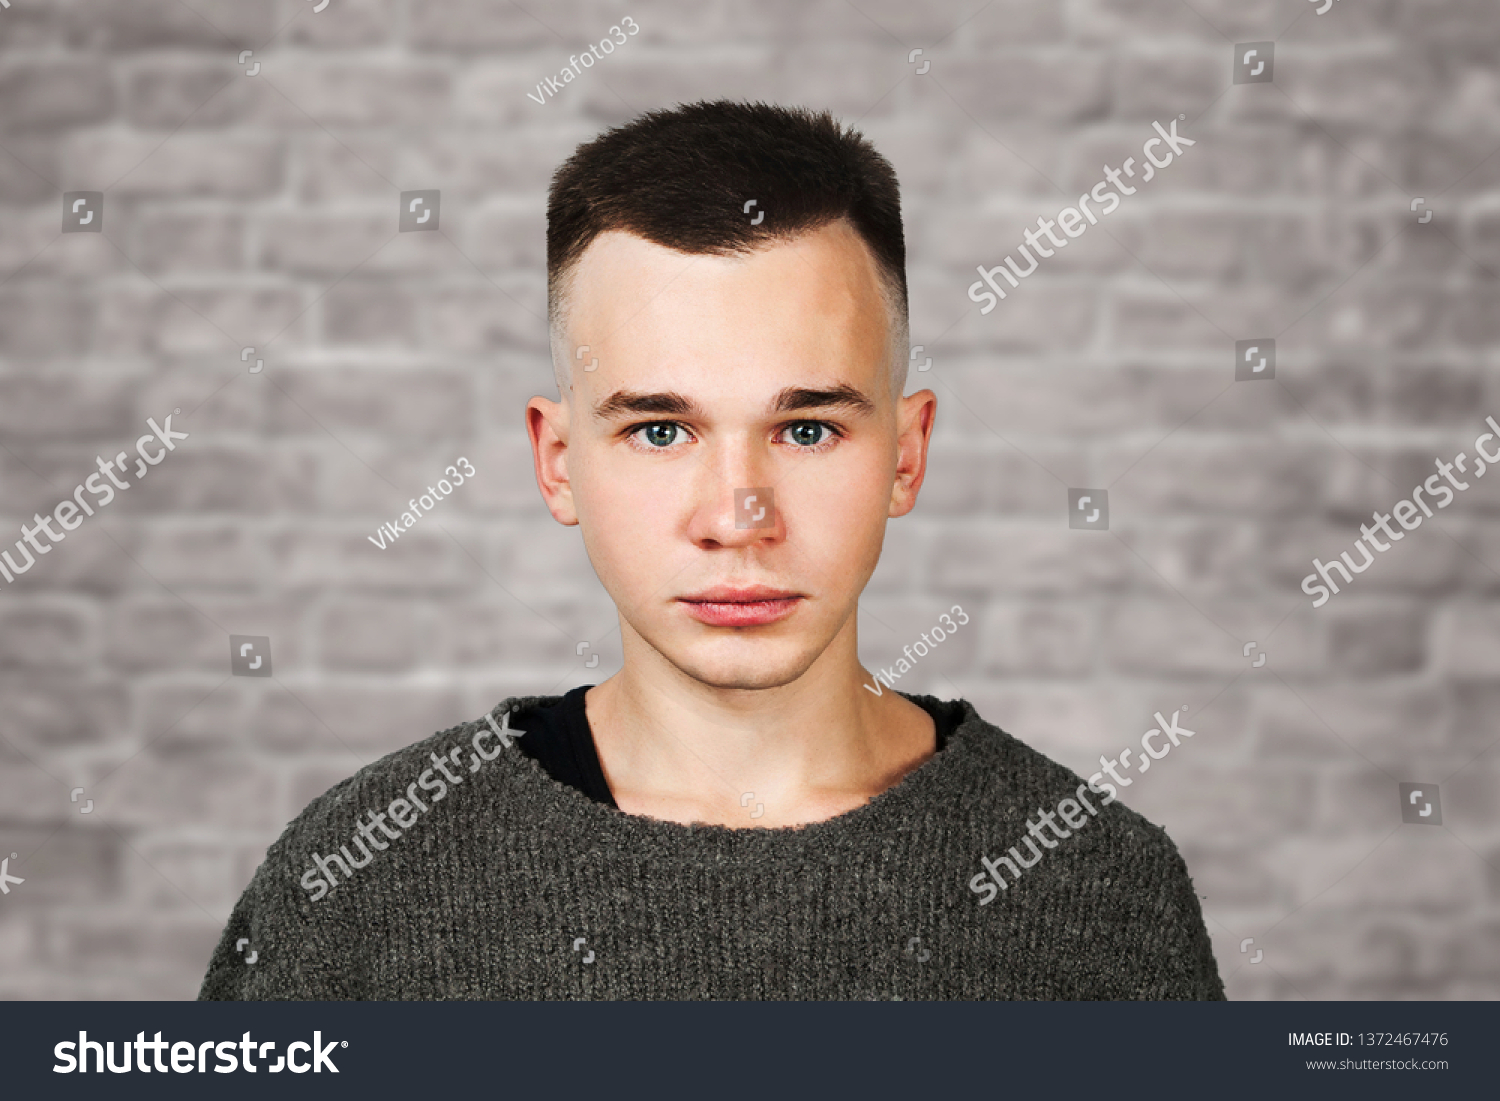 Portrait White Yong Guy Gray Sweater Stock Image Download Now